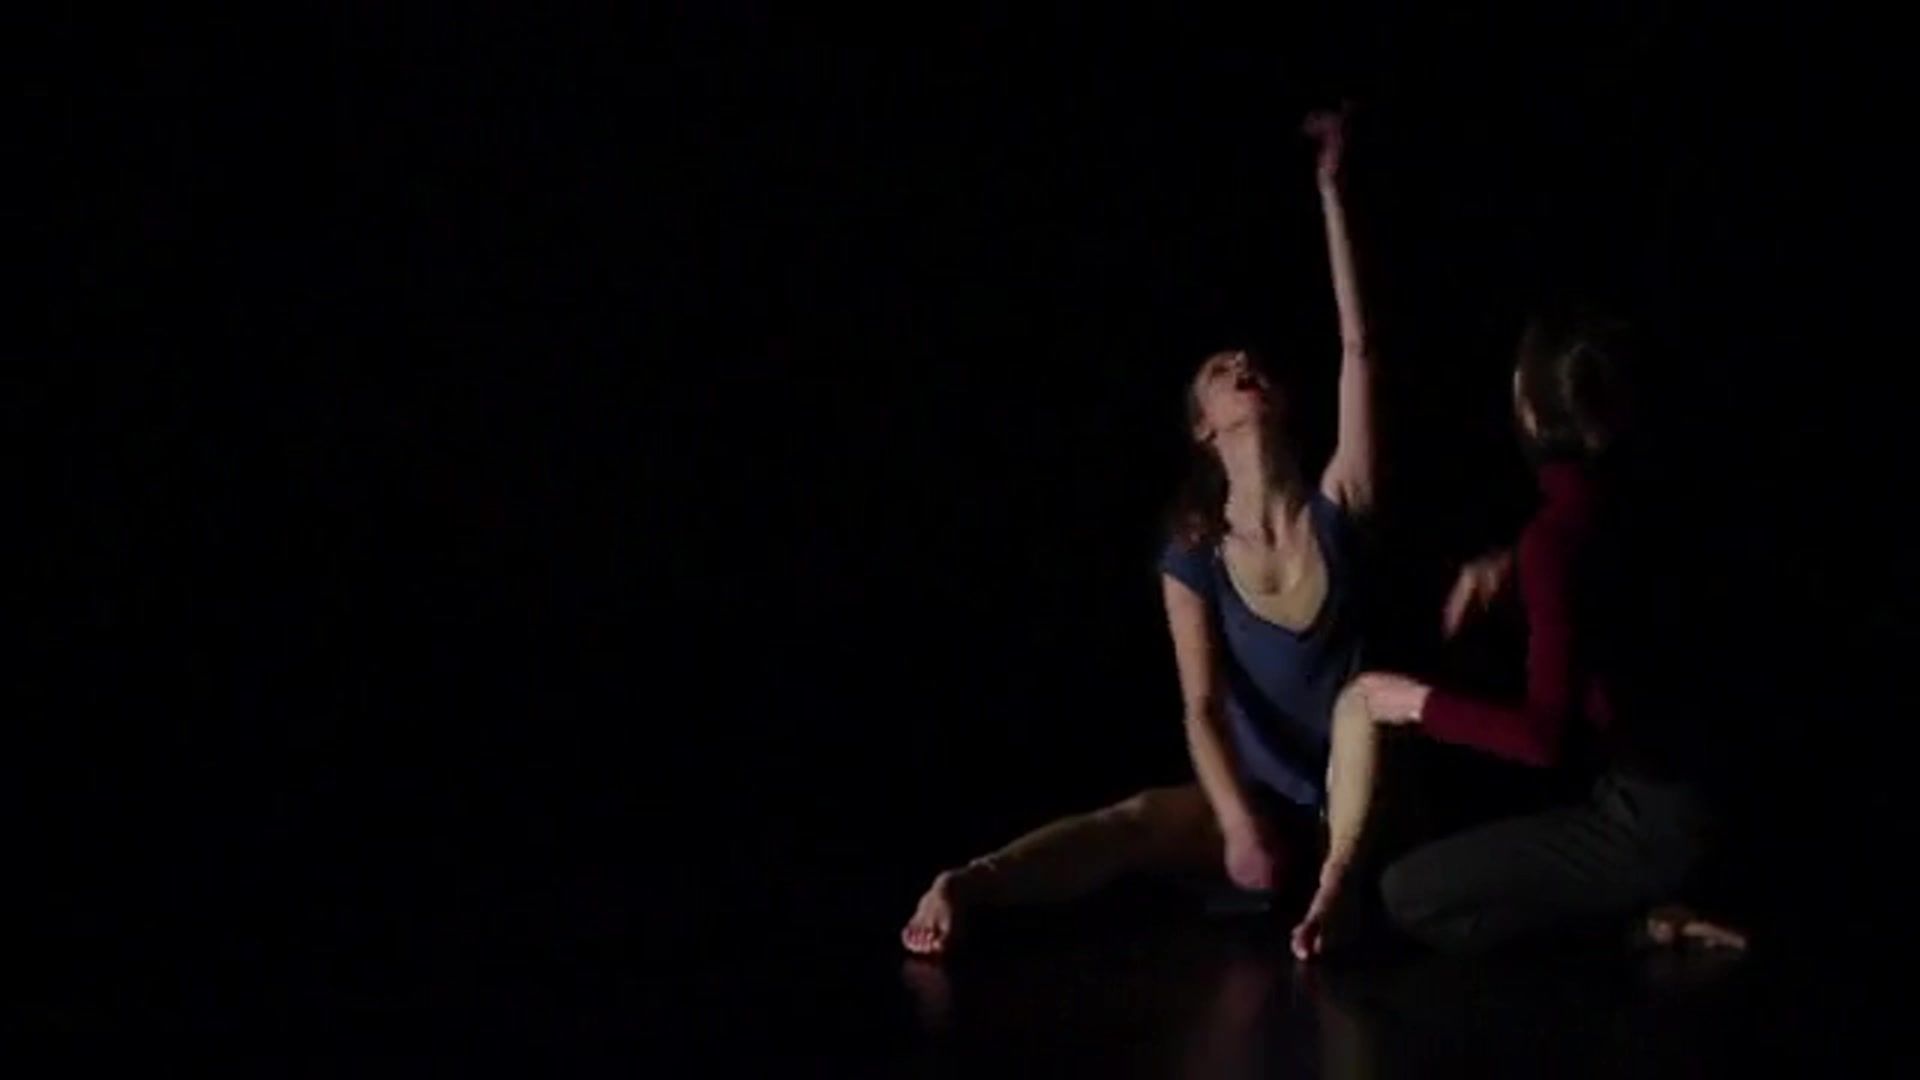 Barely 18 Porn Naked on Stage Performance - Martha Graham in Palais Kabelwerk Vienna - 2014 Amature Allure